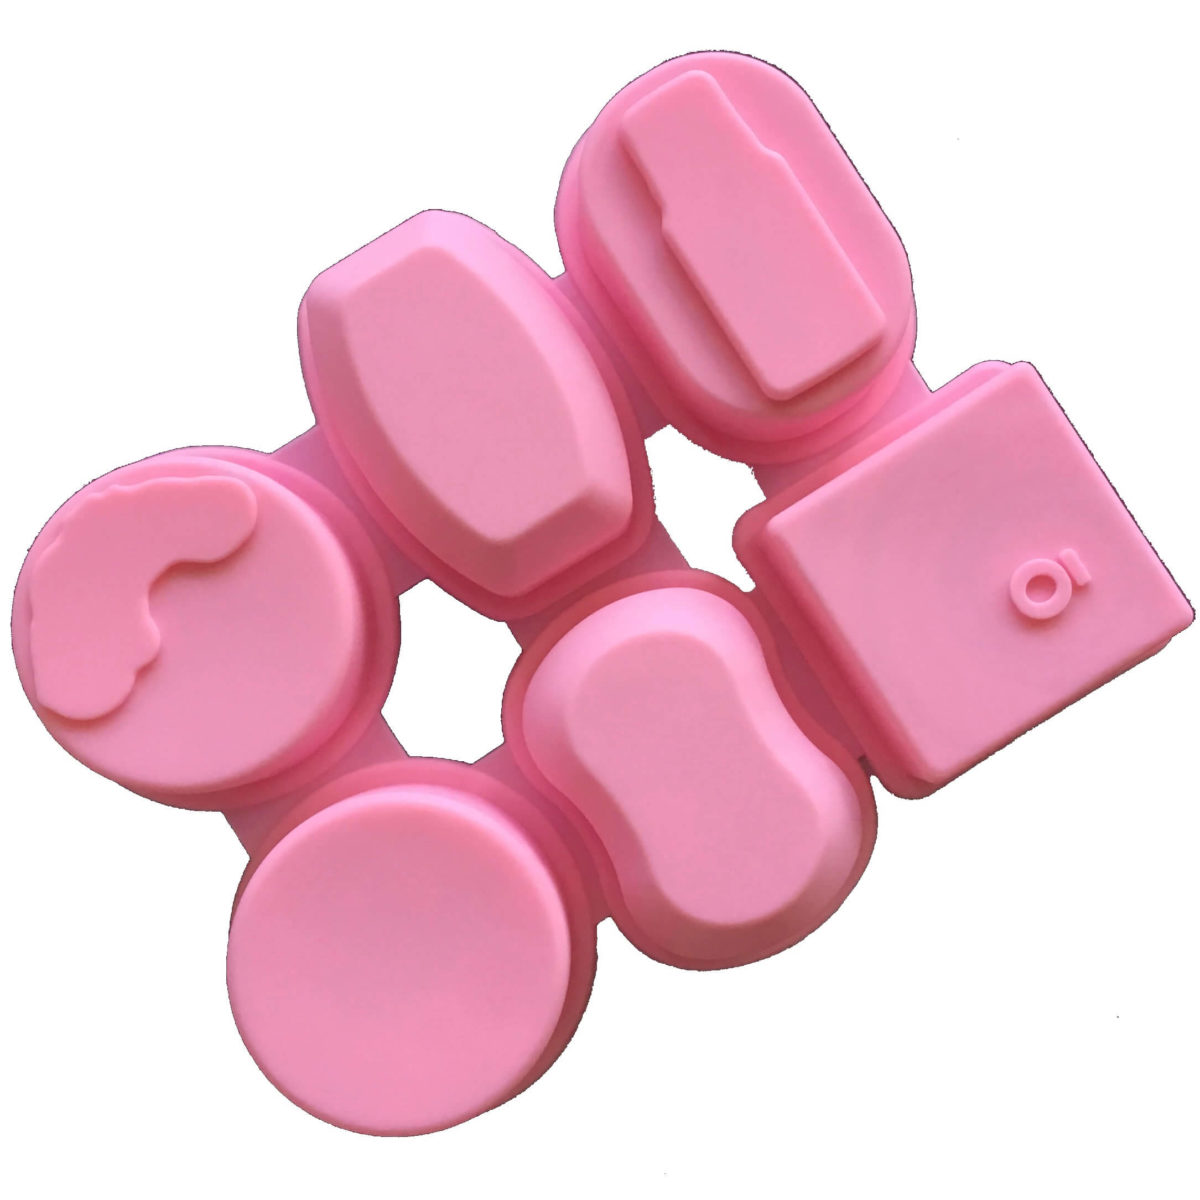 back of doterra essential oils six cavity pink silicone mould with six different cavity designs with an essential oil theme